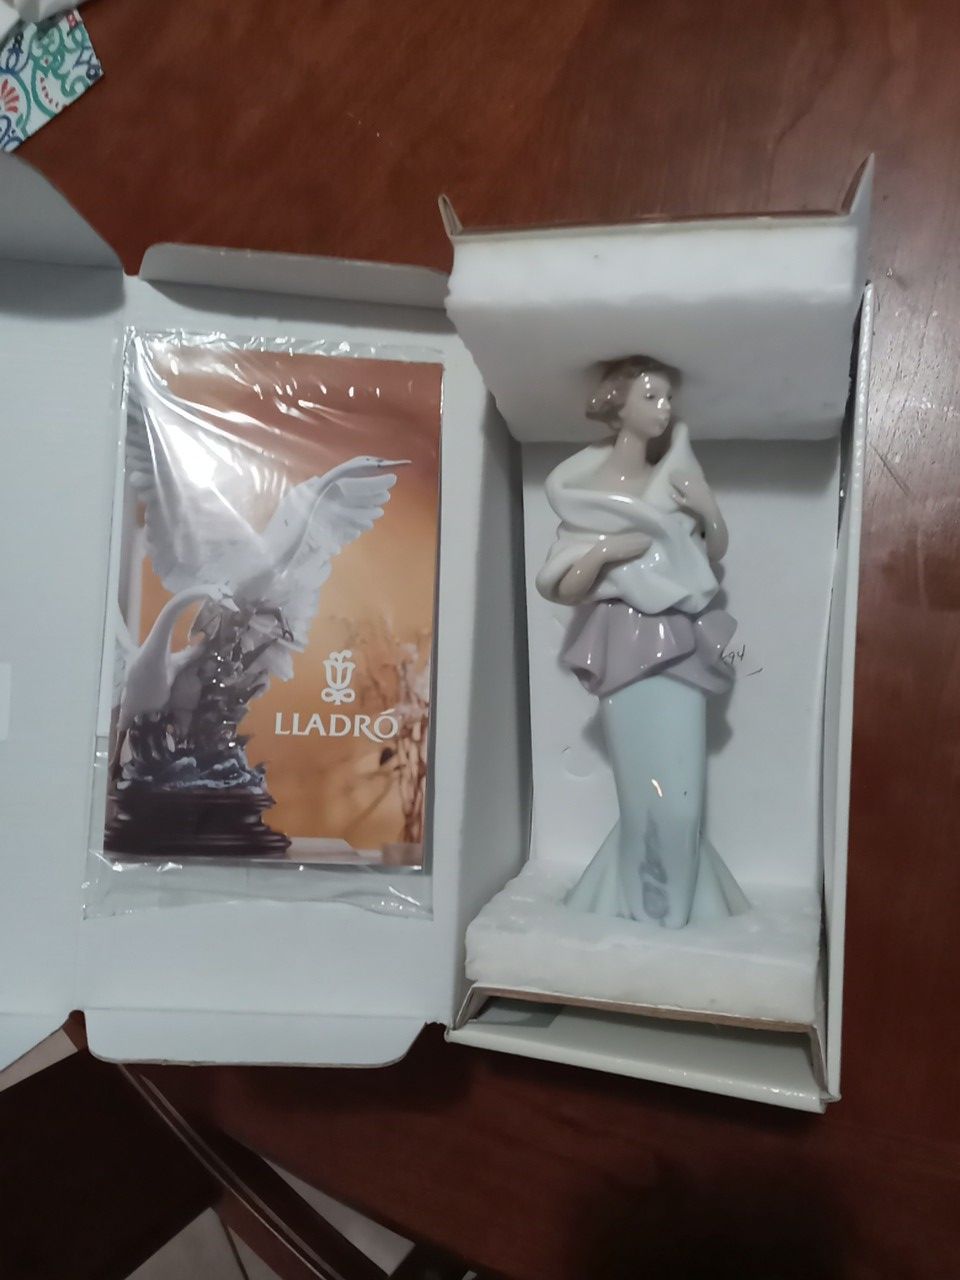 LLADRO "A NIGHT OUT" figurine